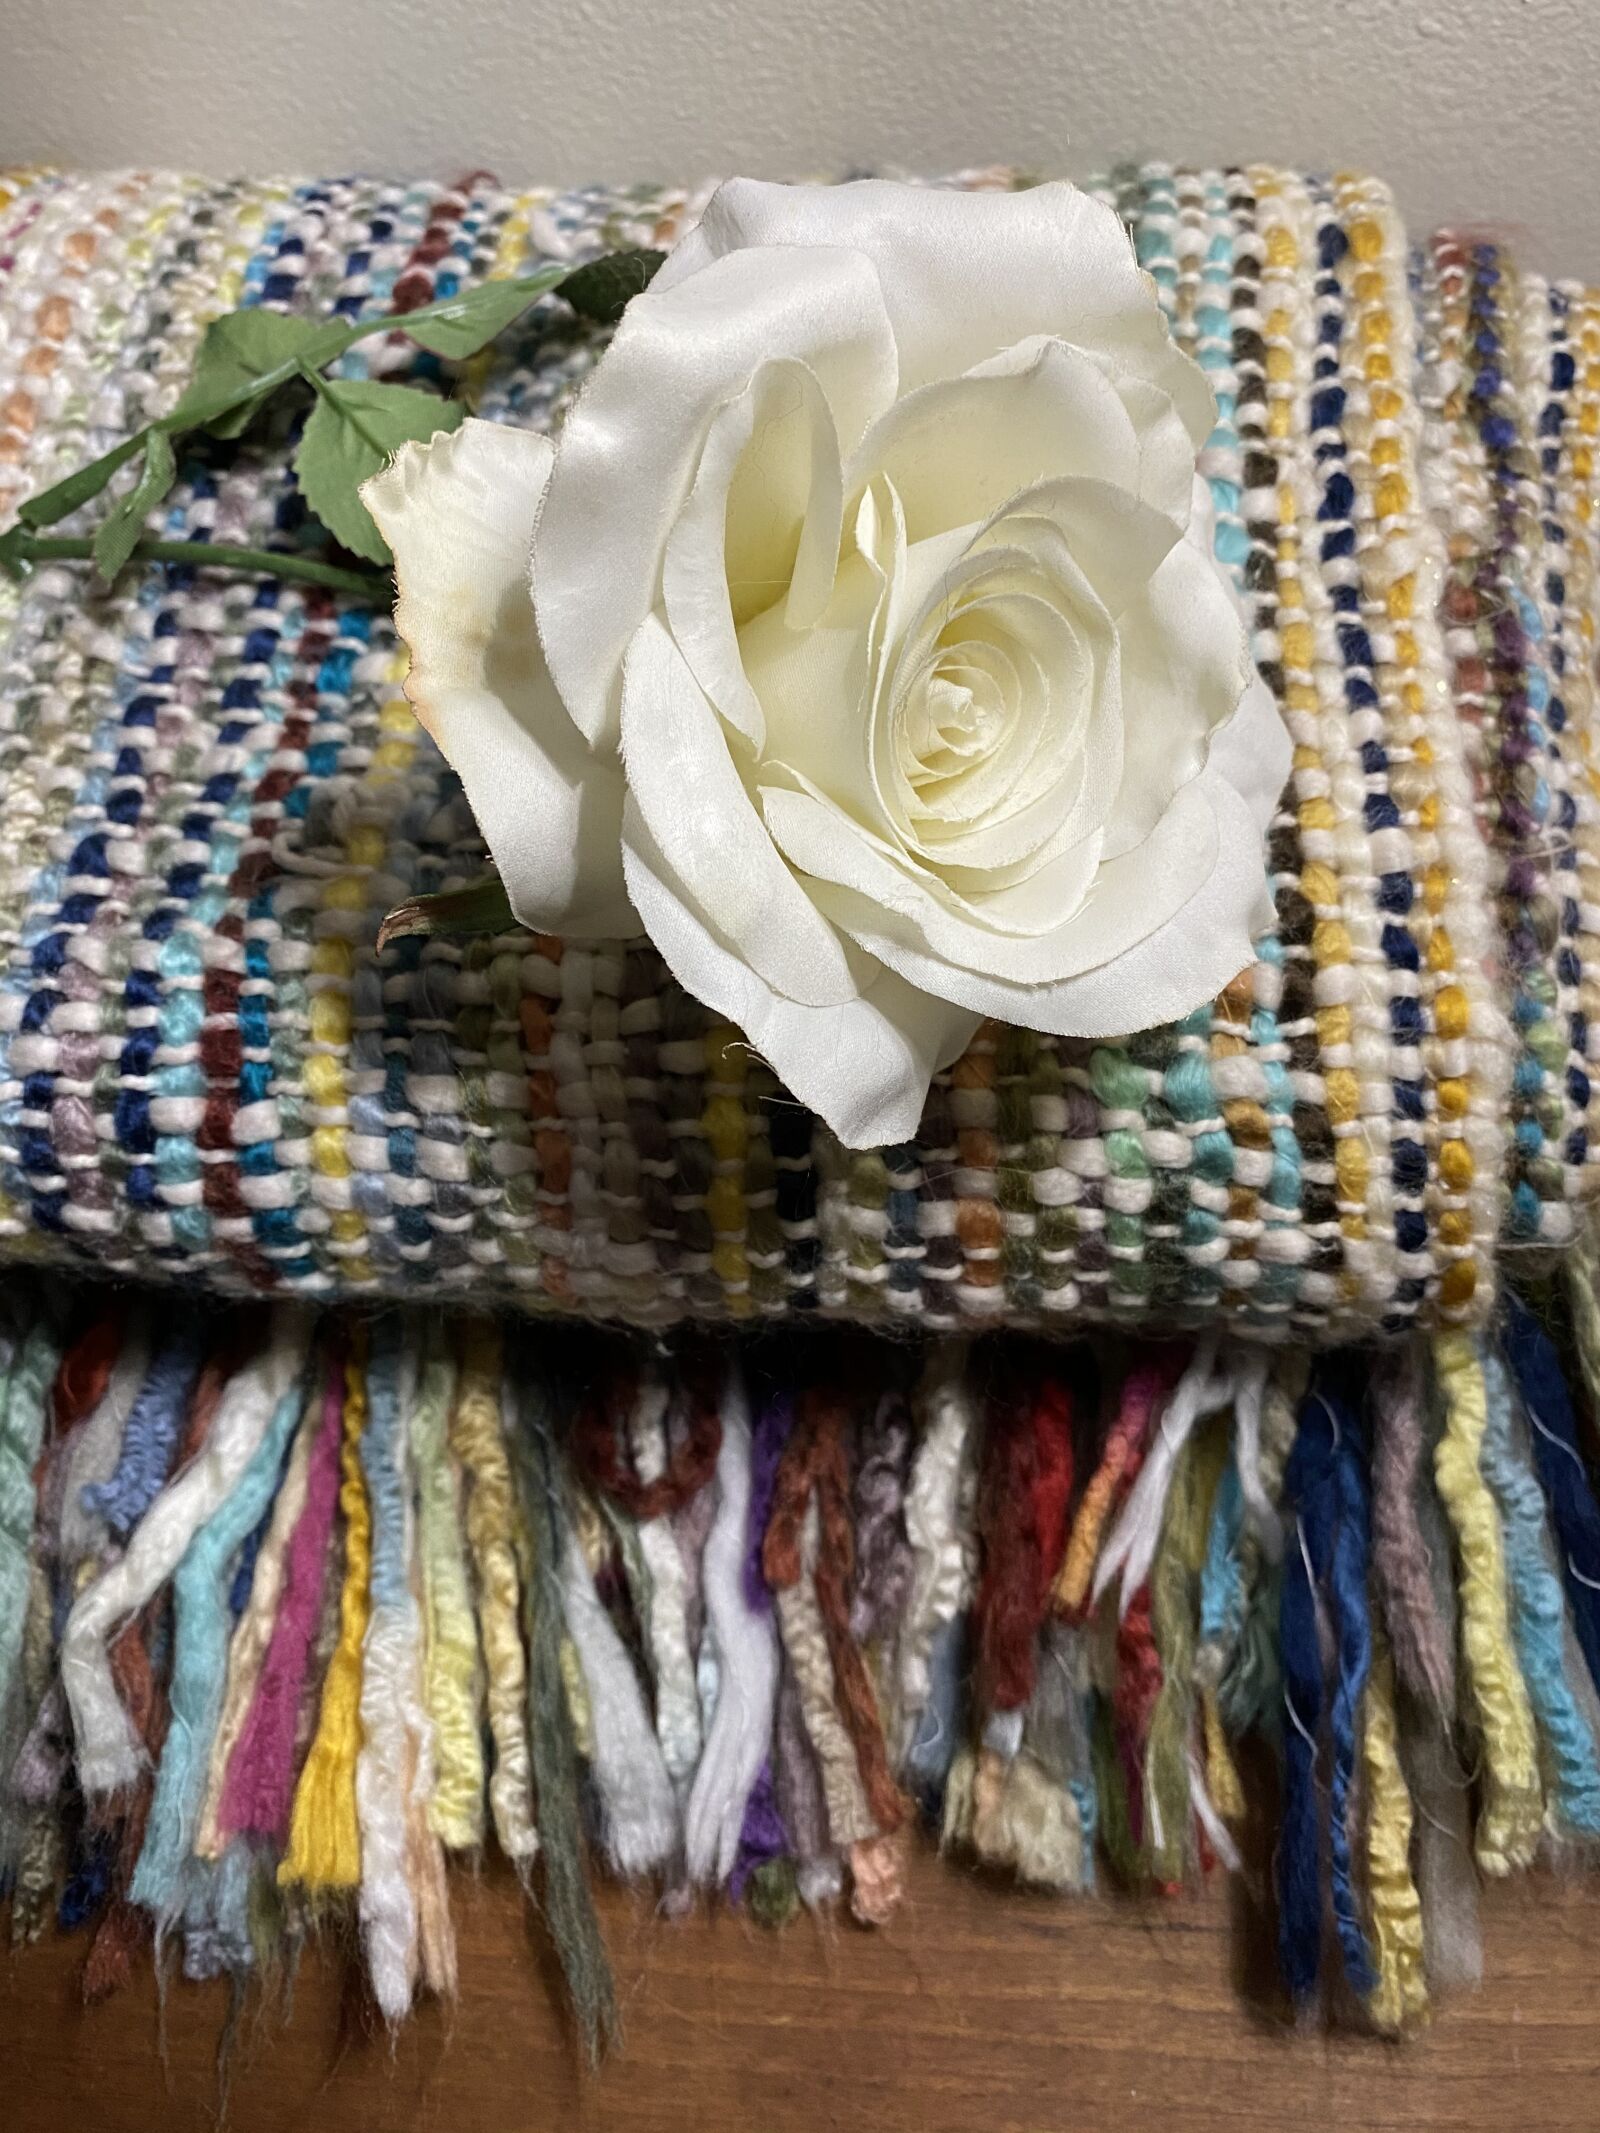 iPhone 11 back dual wide camera 4.25mm f/1.8 sample photo. Rose, throw blanket, comfort photography